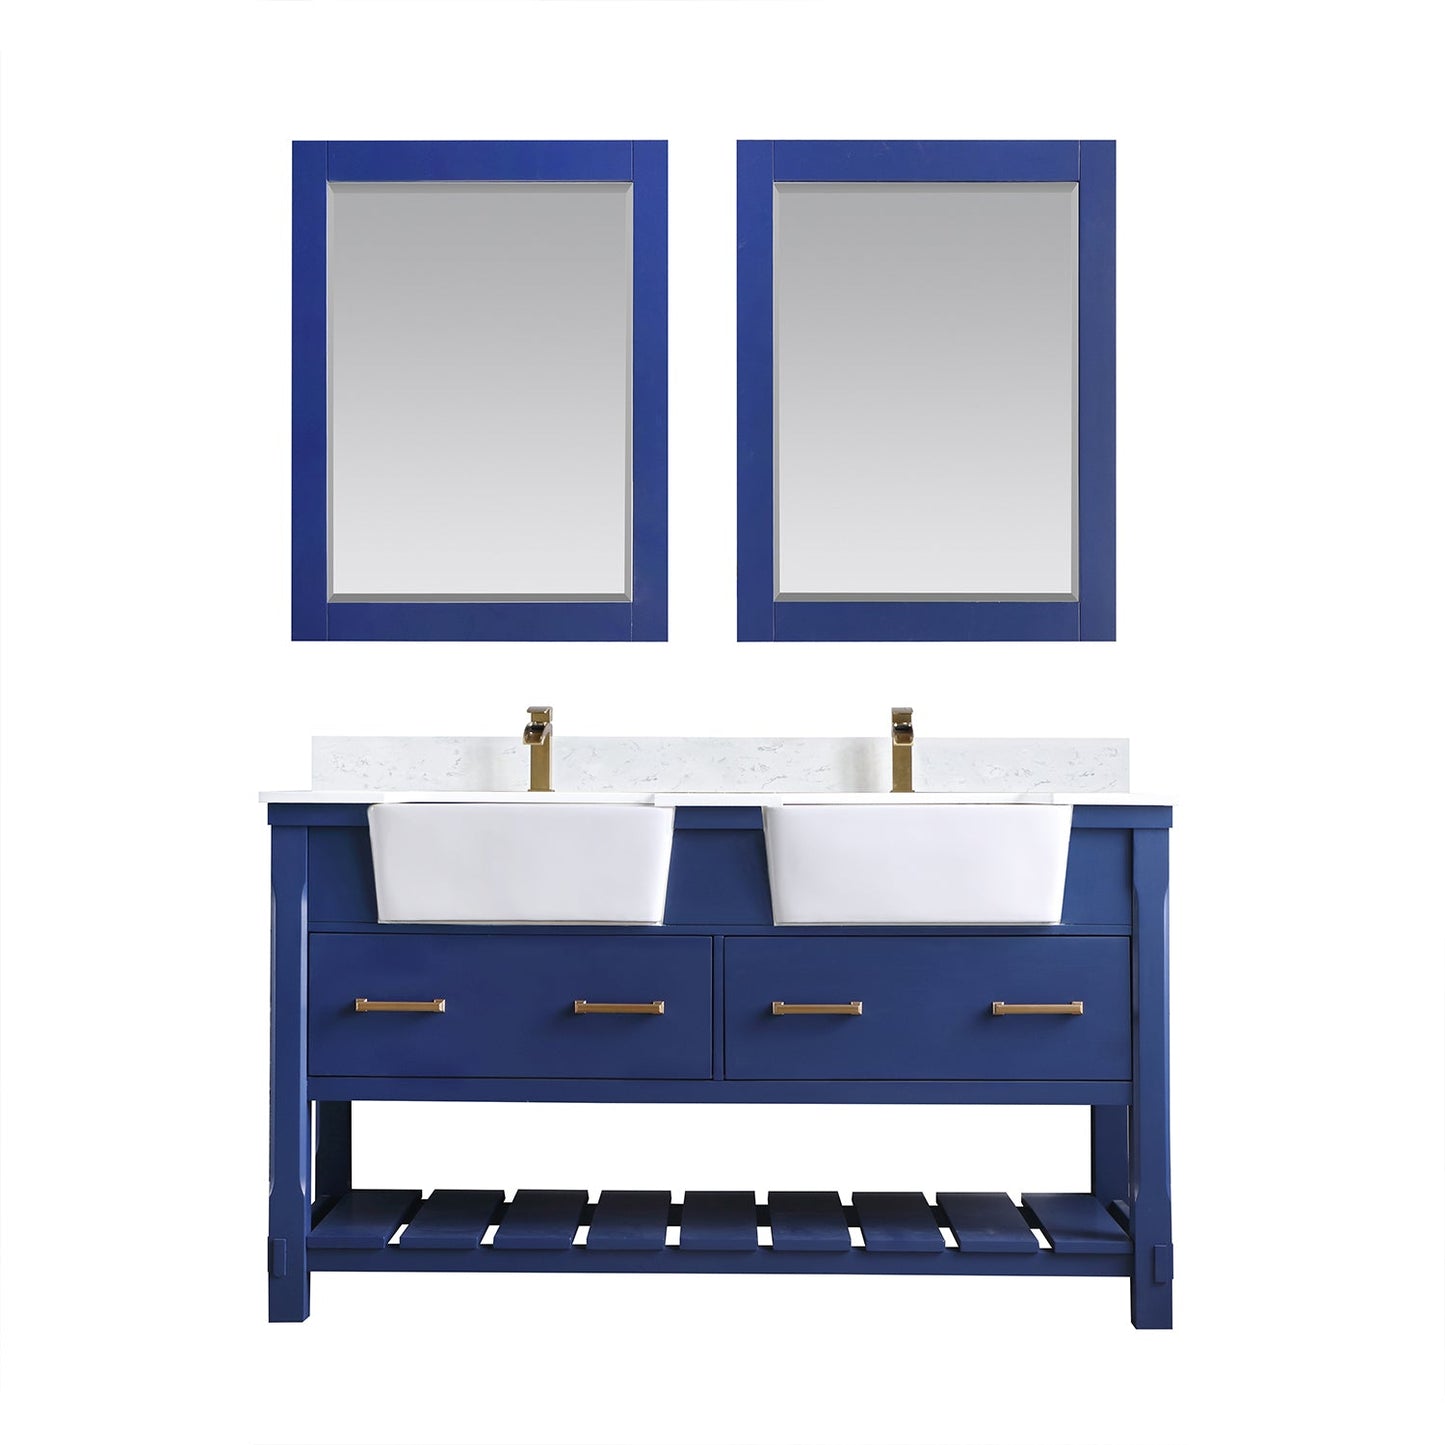 Georgia 60" Double Bathroom Vanity Set in Jewelry Blue and Composite Carrara White Stone Top with White Farmhouse Basin with Mirror